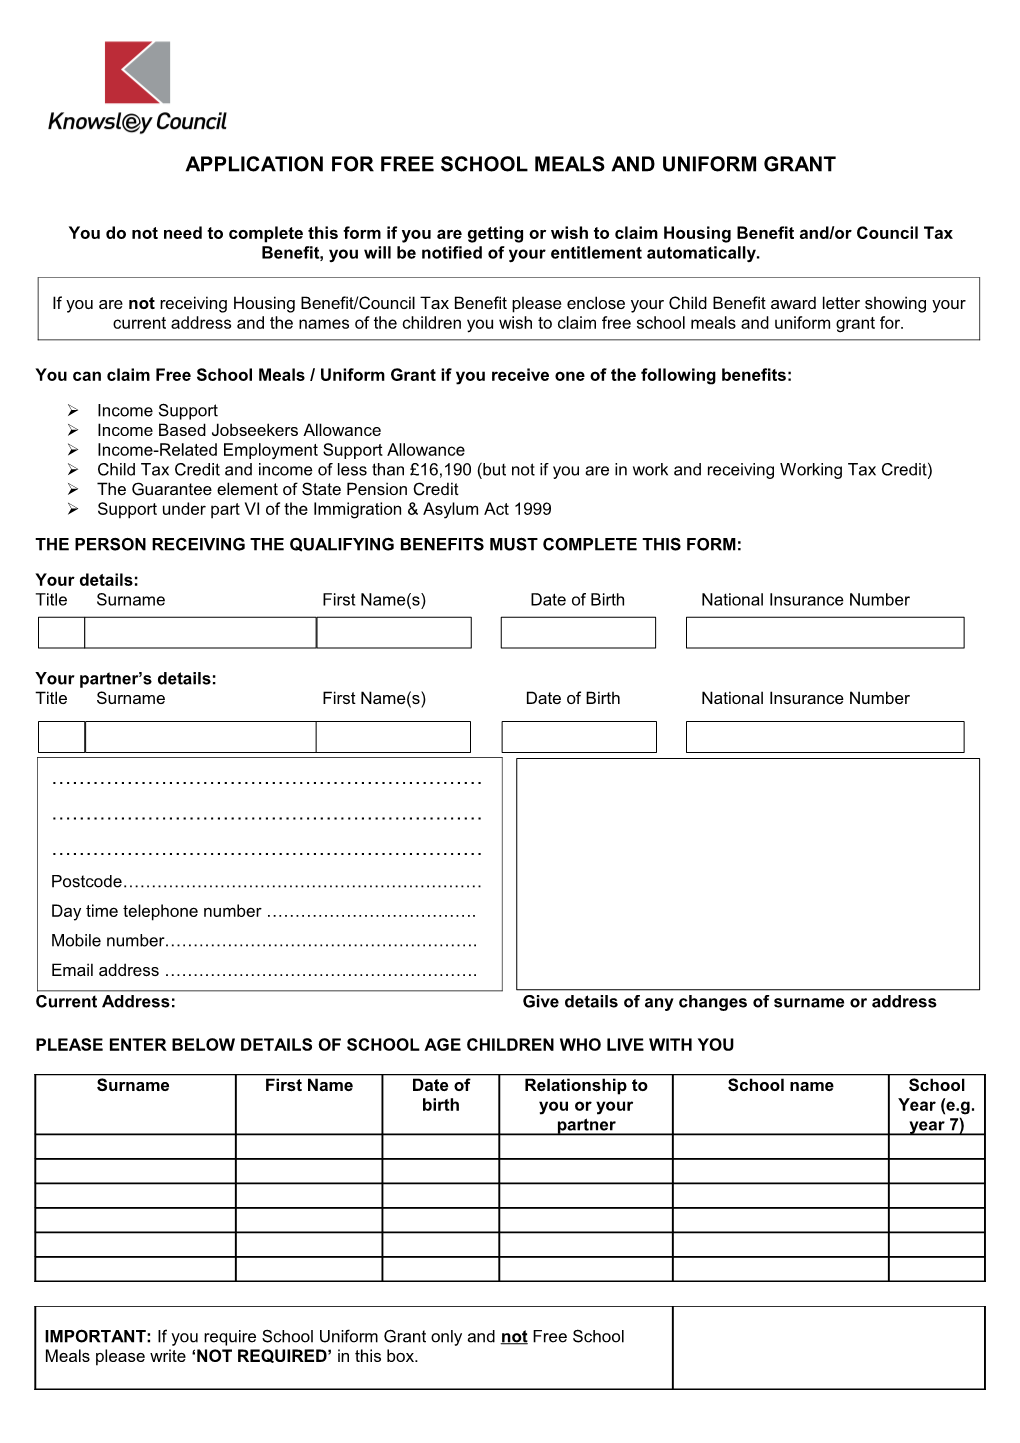 Application for Free School Meals and Uniform Grant